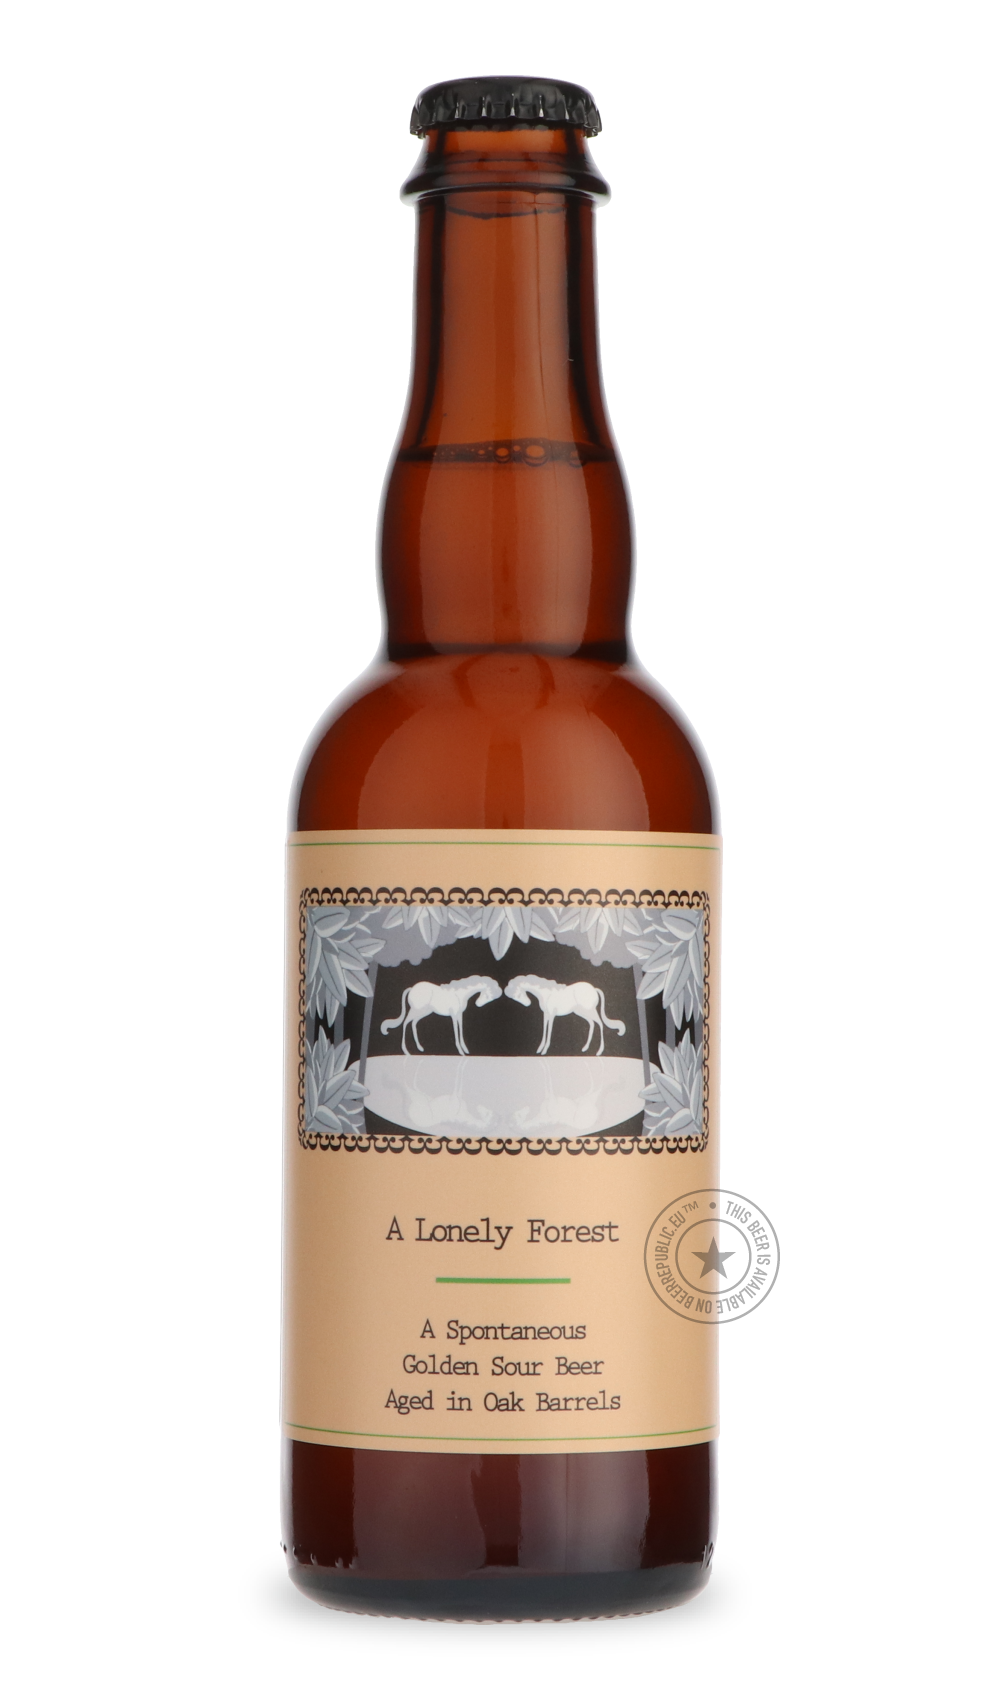 -Small Pony Barrel Works- A Lonely Forest-Sour / Wild & Fruity- Only @ Beer Republic - The best online beer store for American & Canadian craft beer - Buy beer online from the USA and Canada - Bier online kopen - Amerikaans bier kopen - Craft beer store - Craft beer kopen - Amerikanisch bier kaufen - Bier online kaufen - Acheter biere online - IPA - Stout - Porter - New England IPA - Hazy IPA - Imperial Stout - Barrel Aged - Barrel Aged Imperial Stout - Brown - Dark beer - Blond - Blonde - Pilsner - Lager -